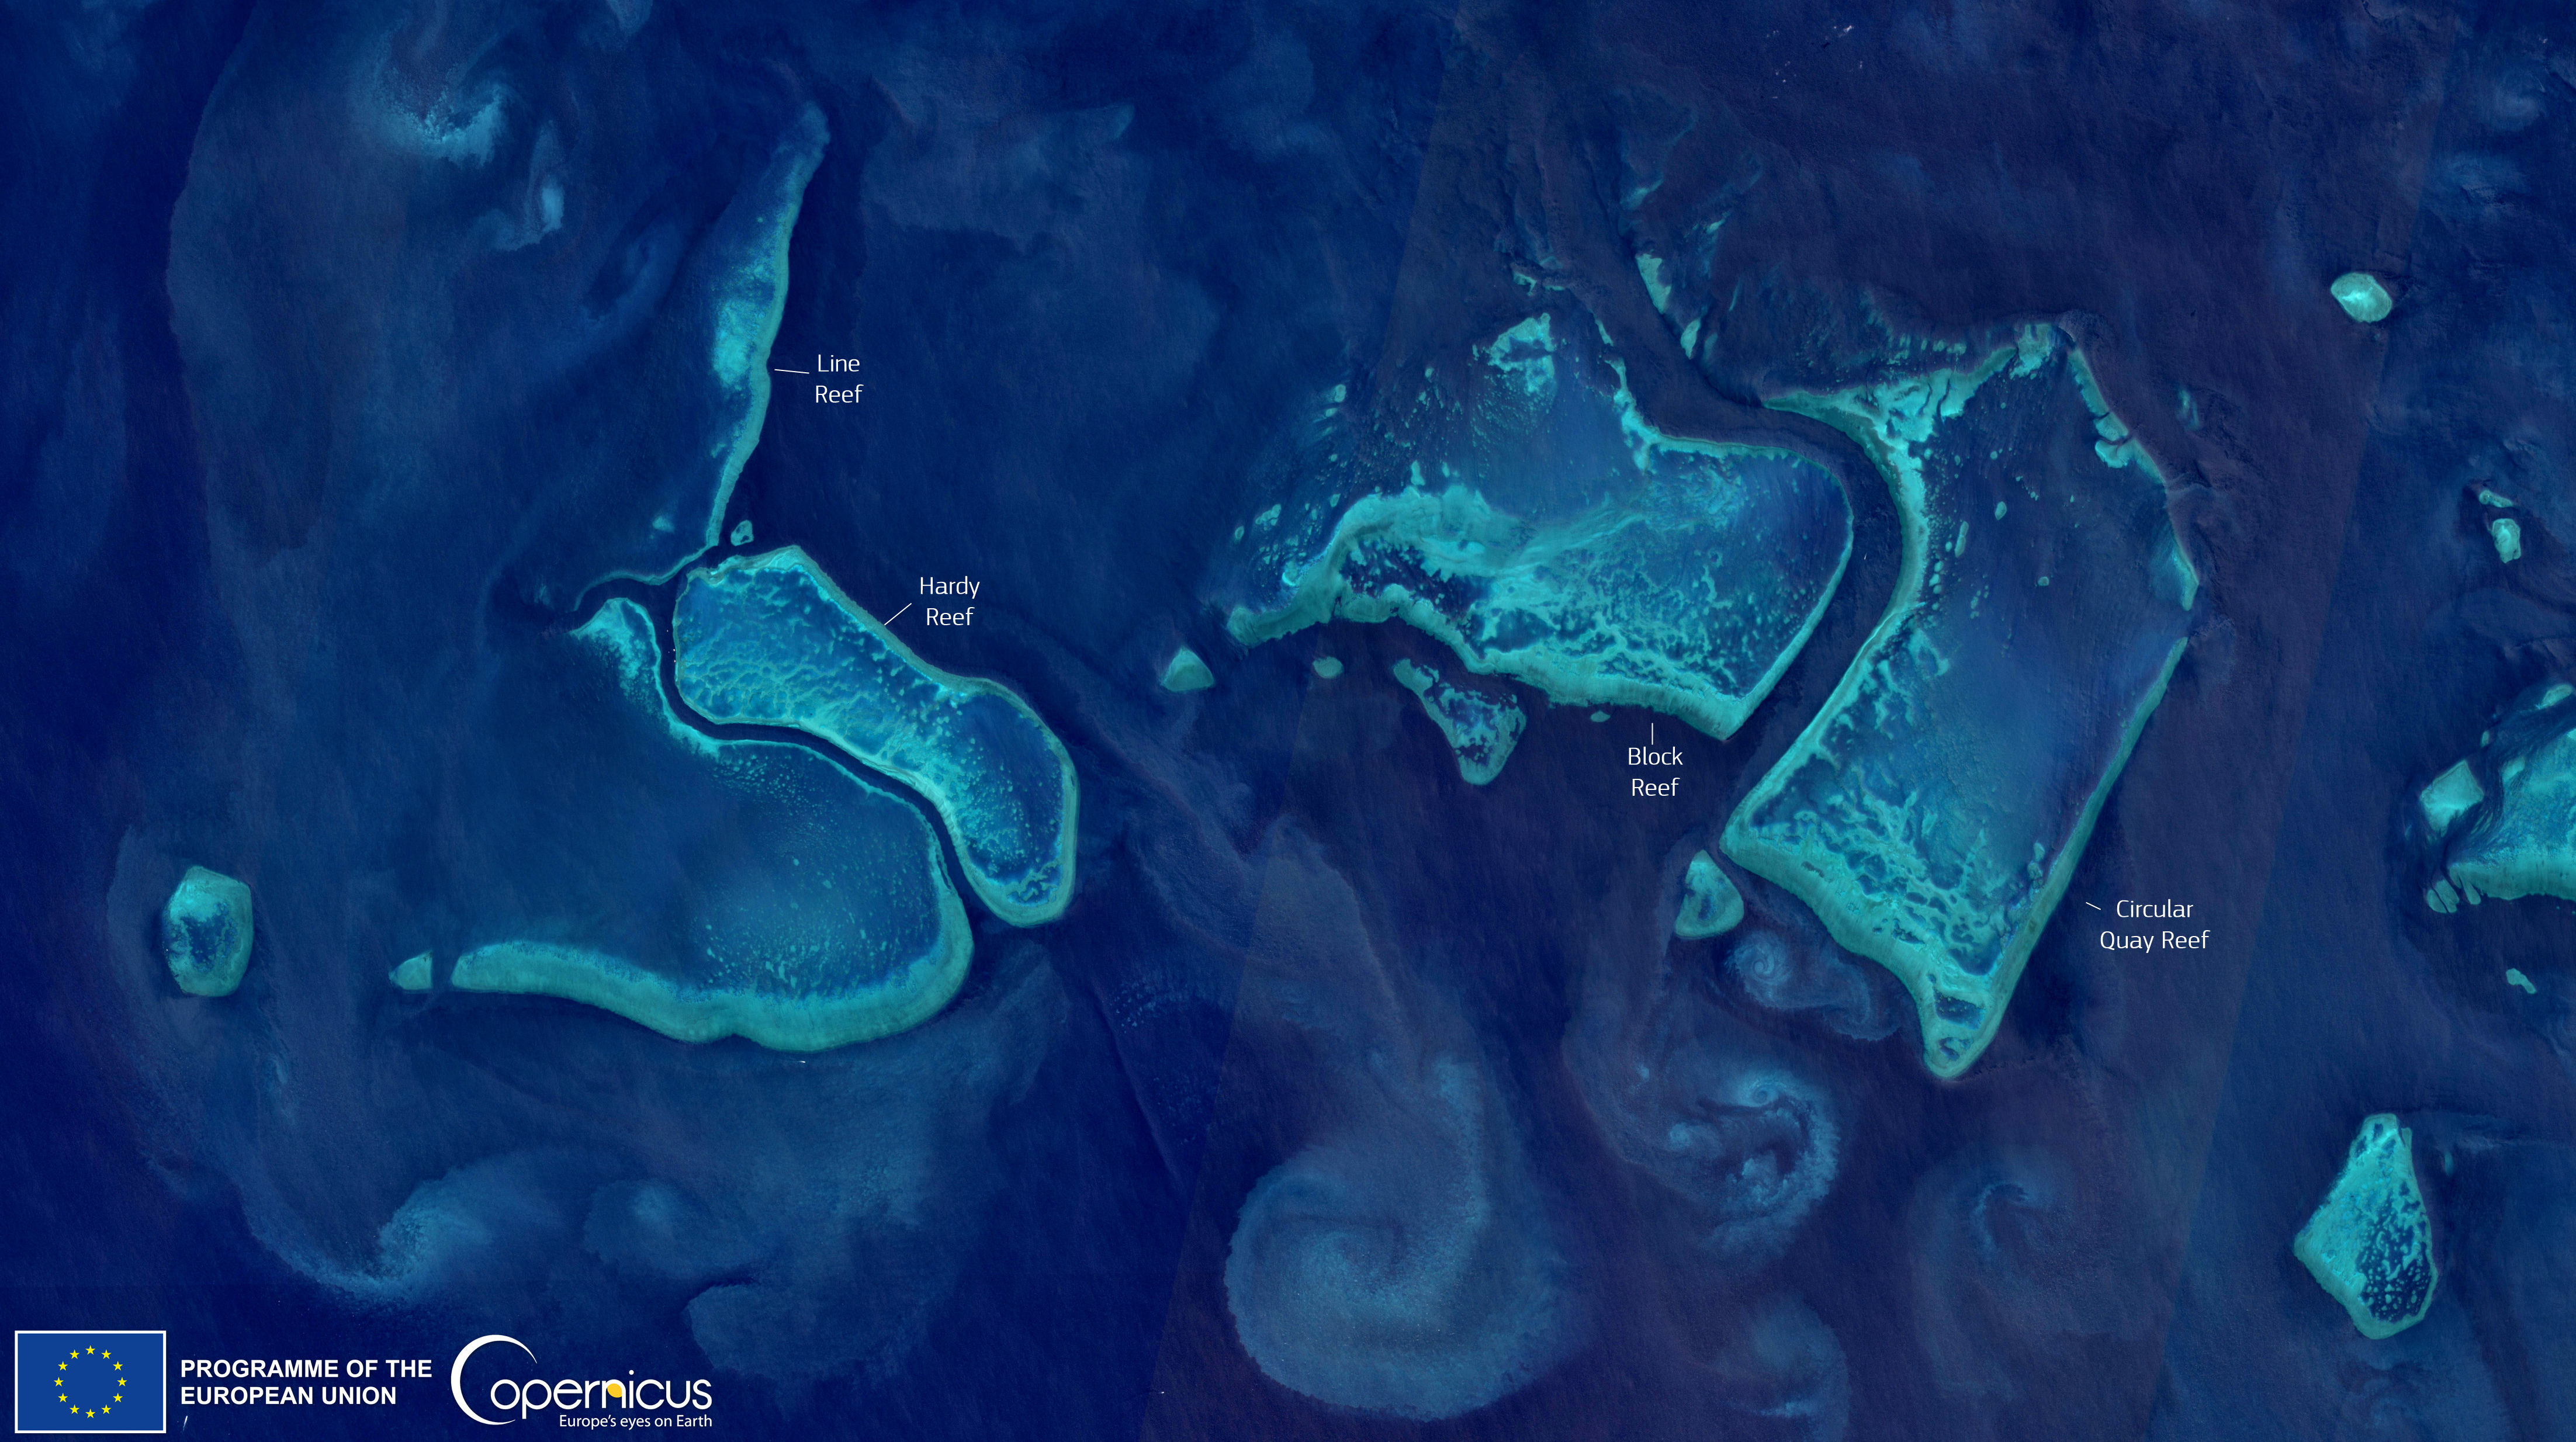 Reefs off the Whitsunday Islands, one of the regions most affected by a new coral bleaching event in the Great Barrier Reef, Queensland, Australia